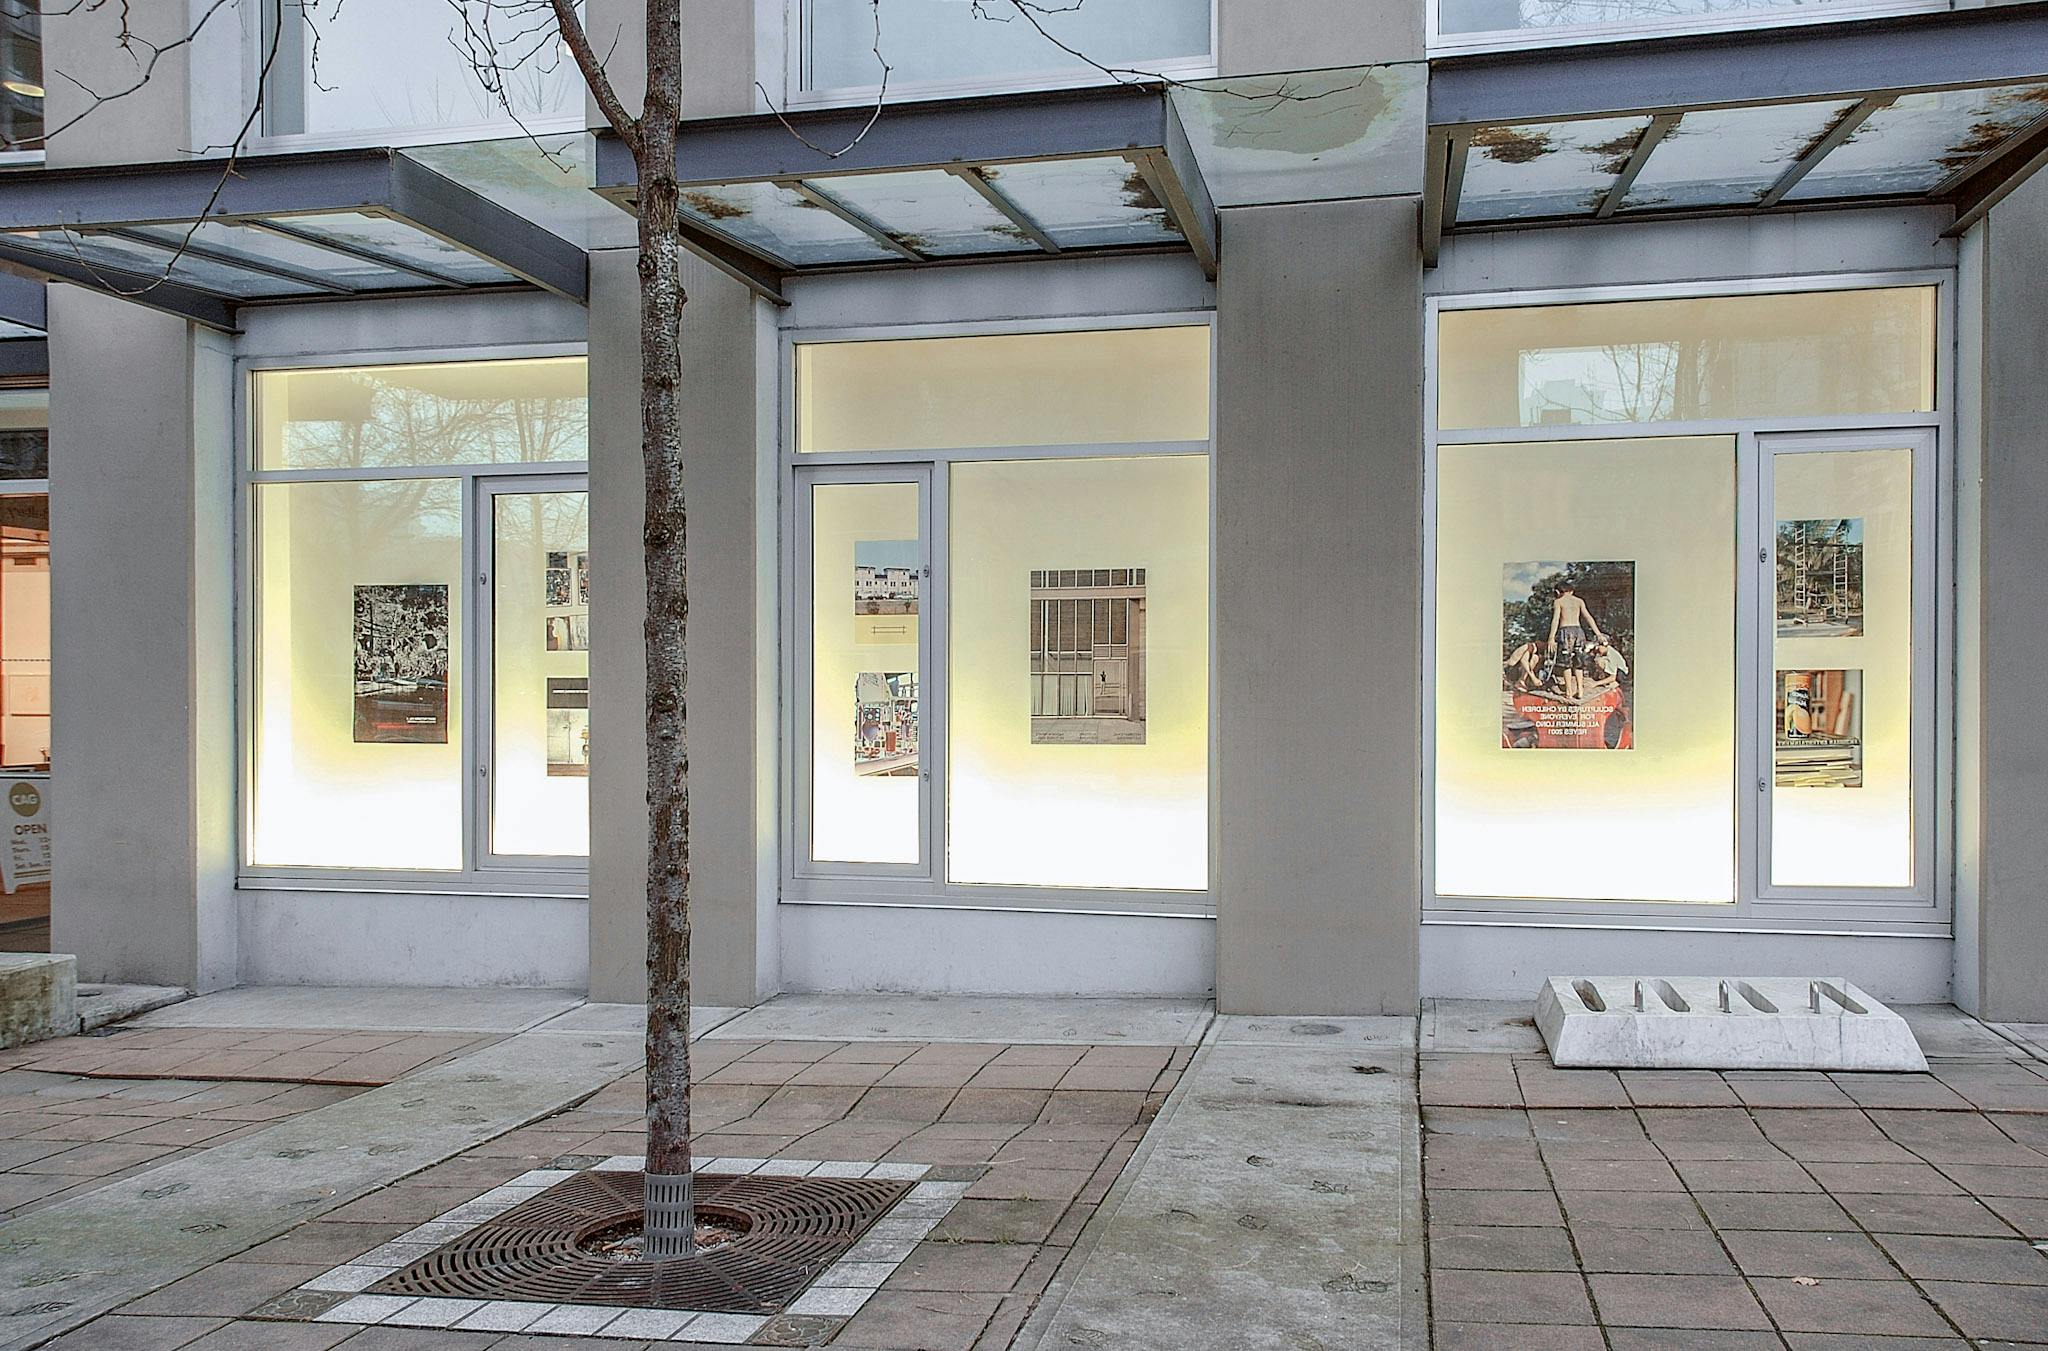 Each of the CAG exterior window spaces displays three various-sized posters made by Andrew Reyes. The images on those posters are the enlarged coloured photographs taken in outdoor settings.